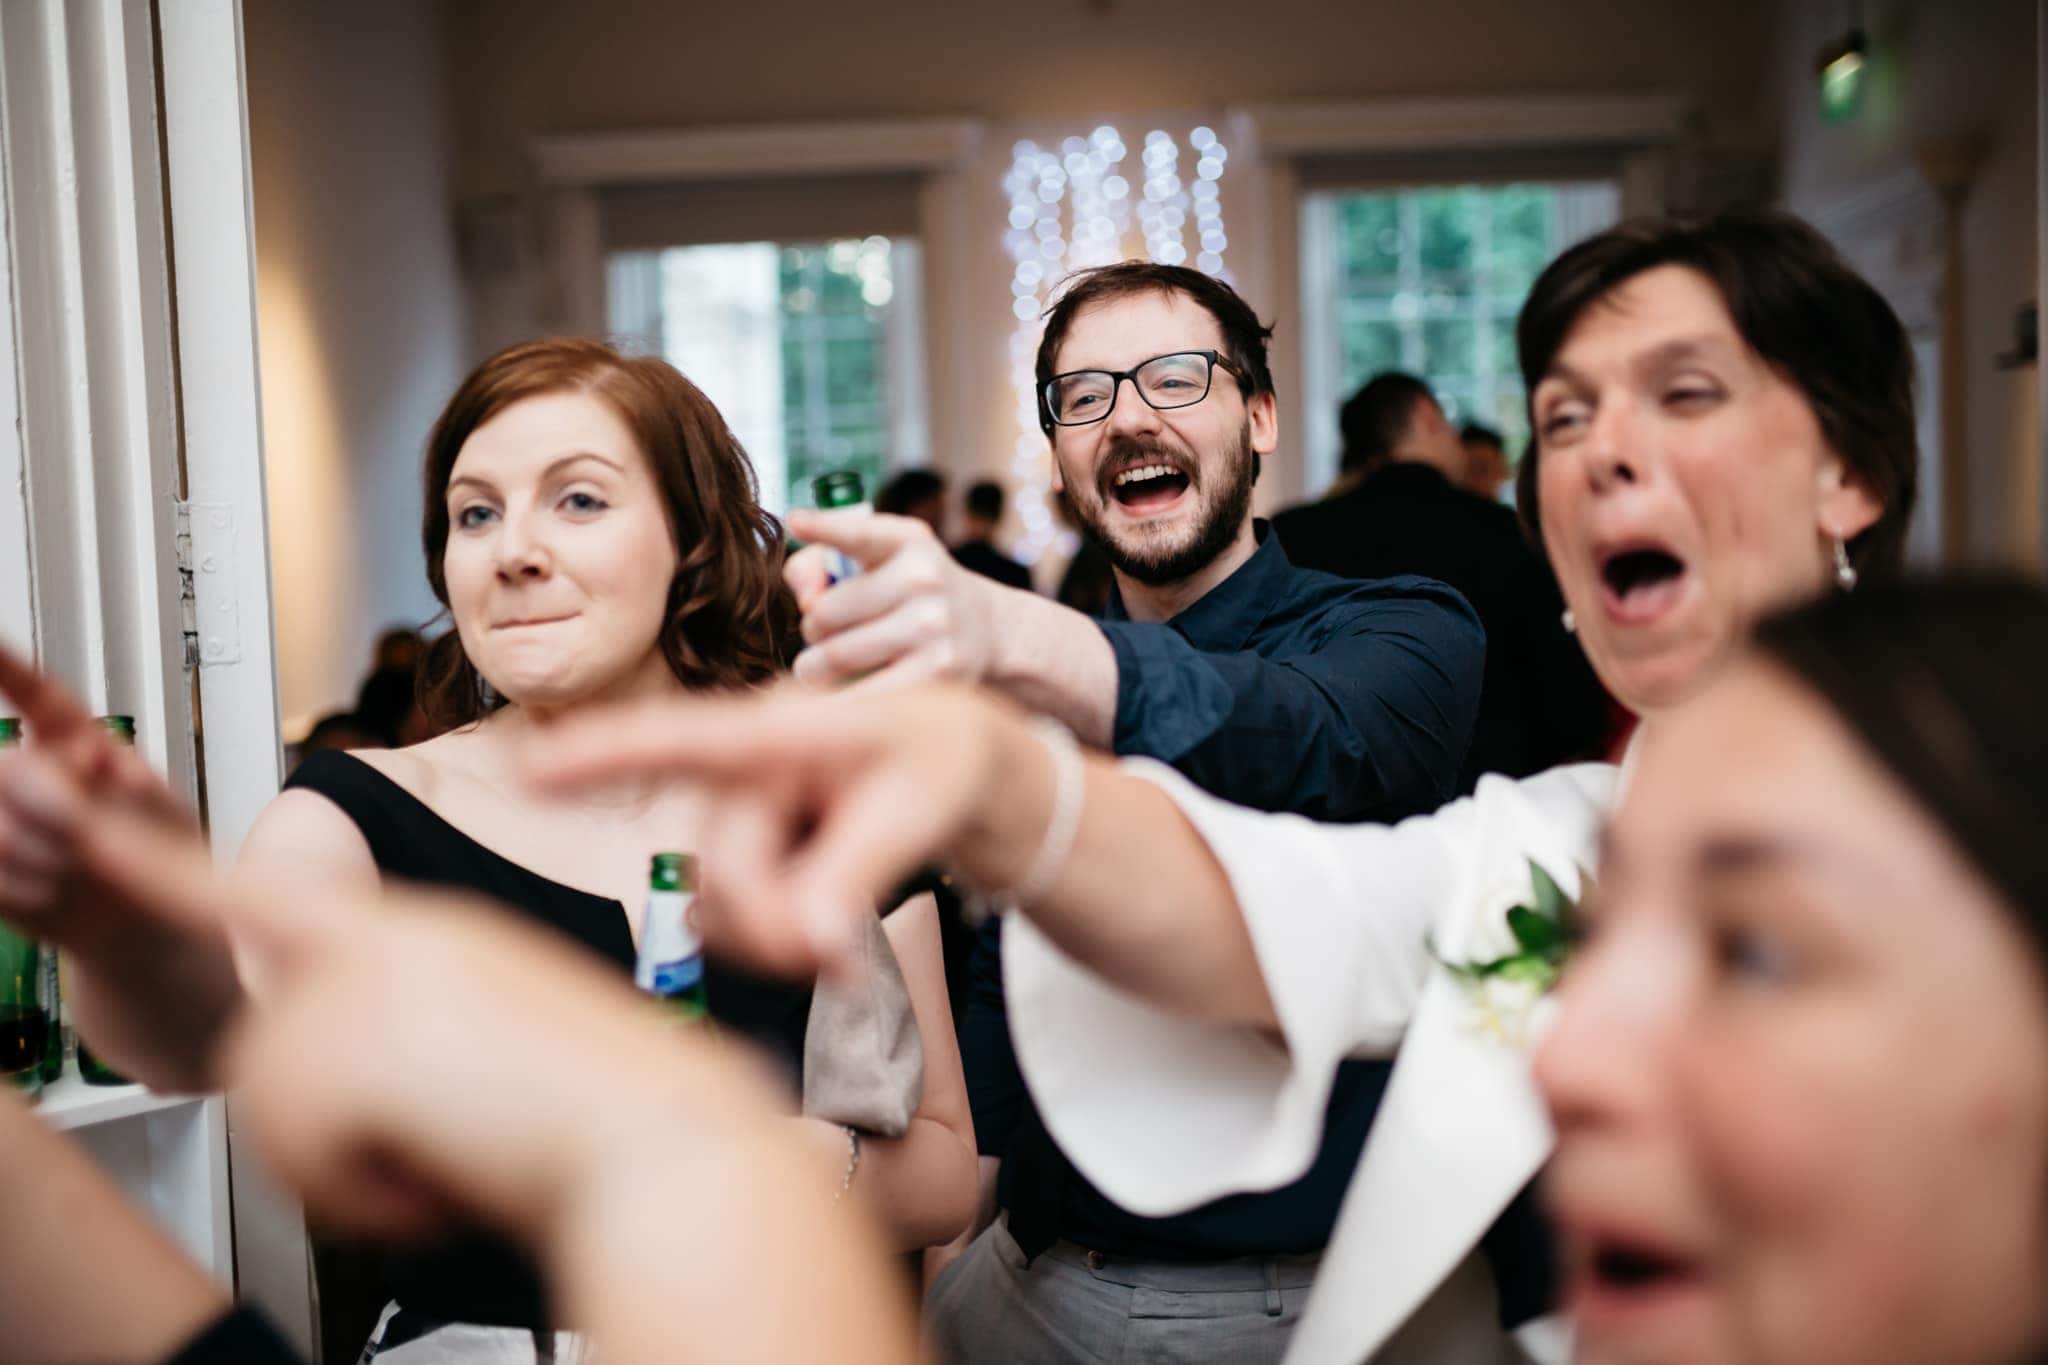 Wedding guests playing games